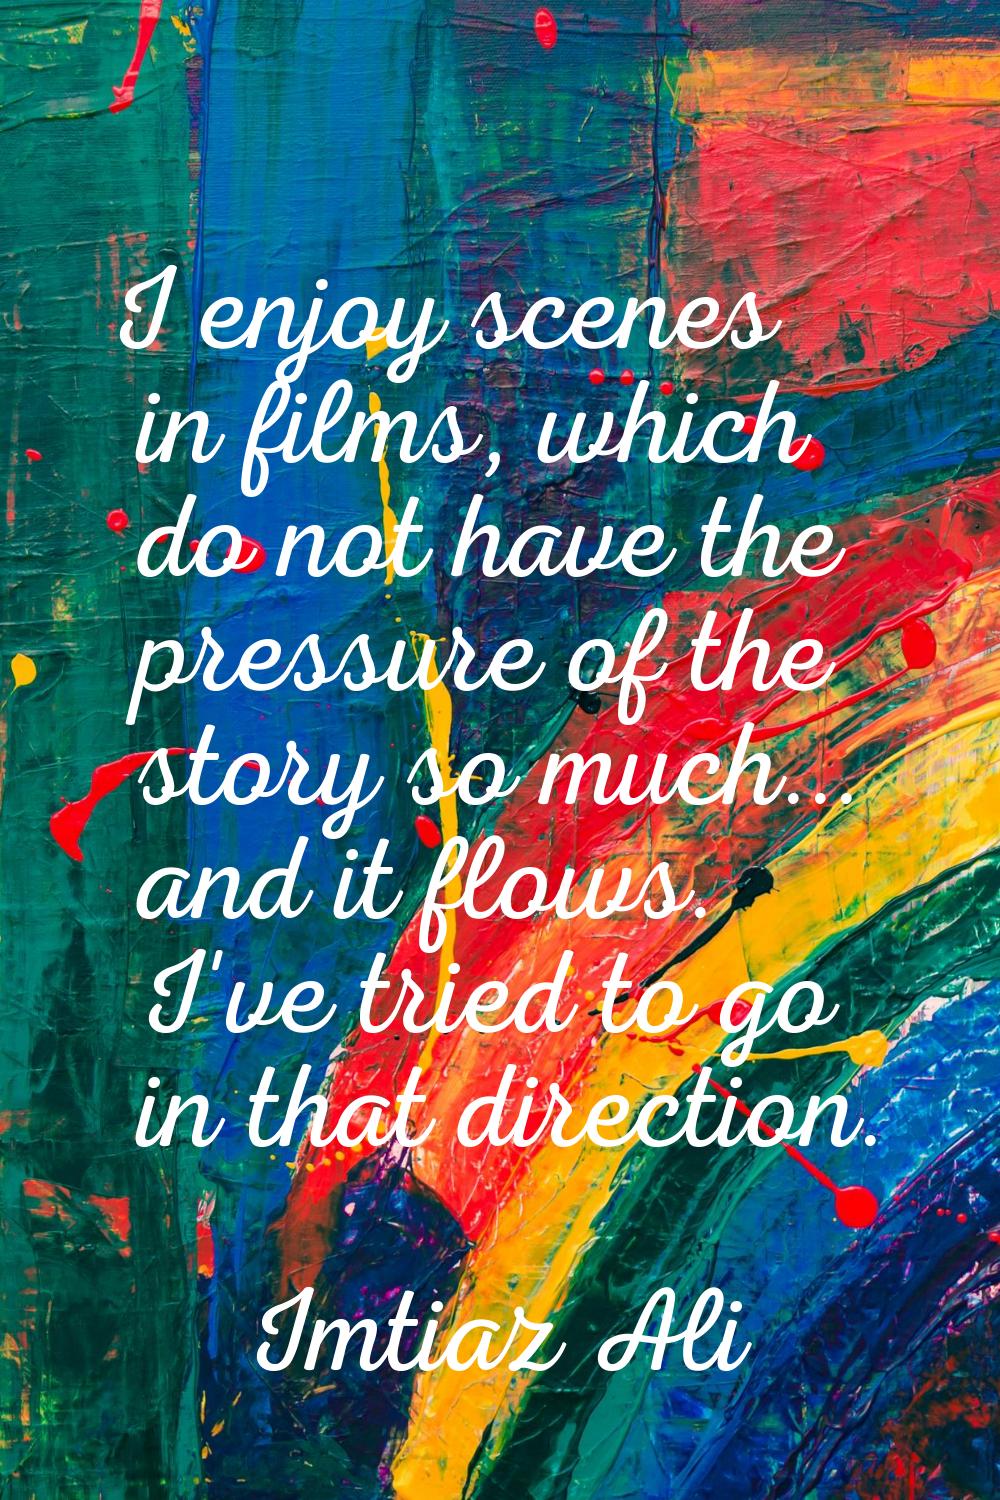 I enjoy scenes in films, which do not have the pressure of the story so much... and it flows. I've 